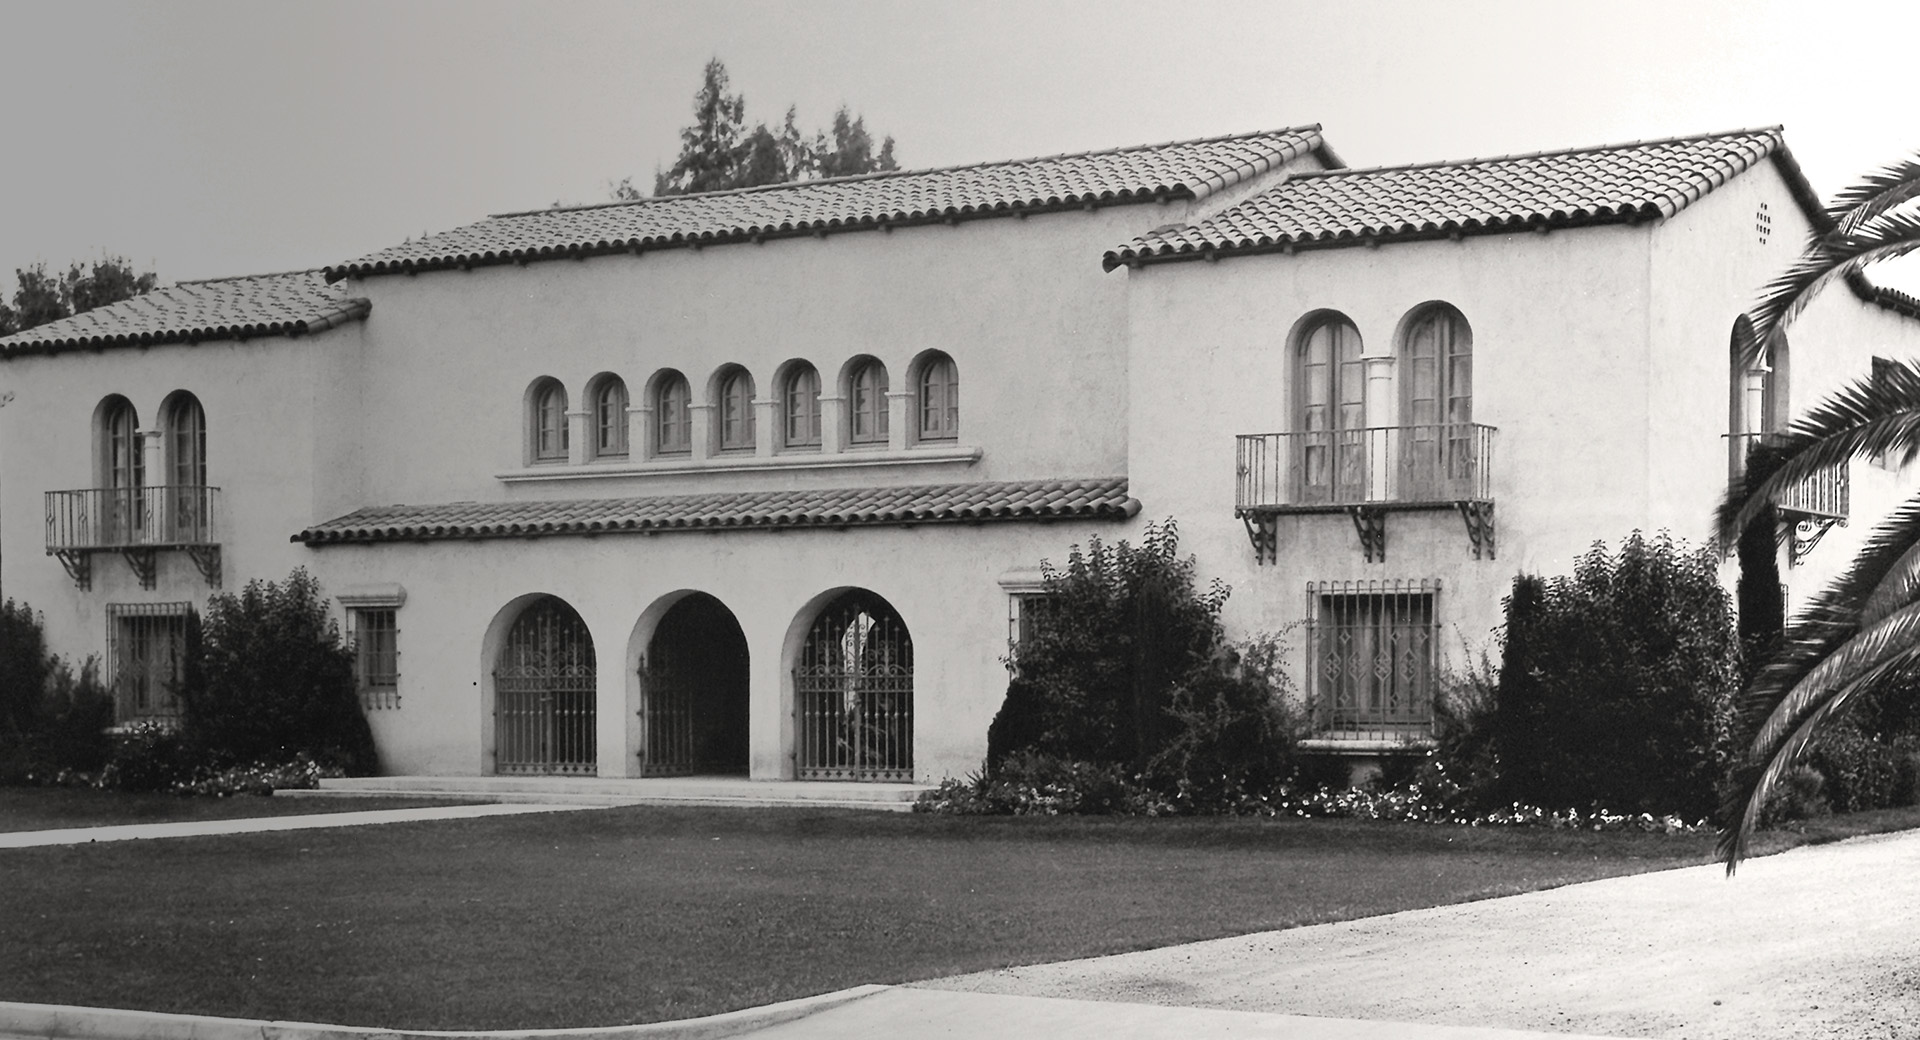 A black and white photo of a building with palm trees.